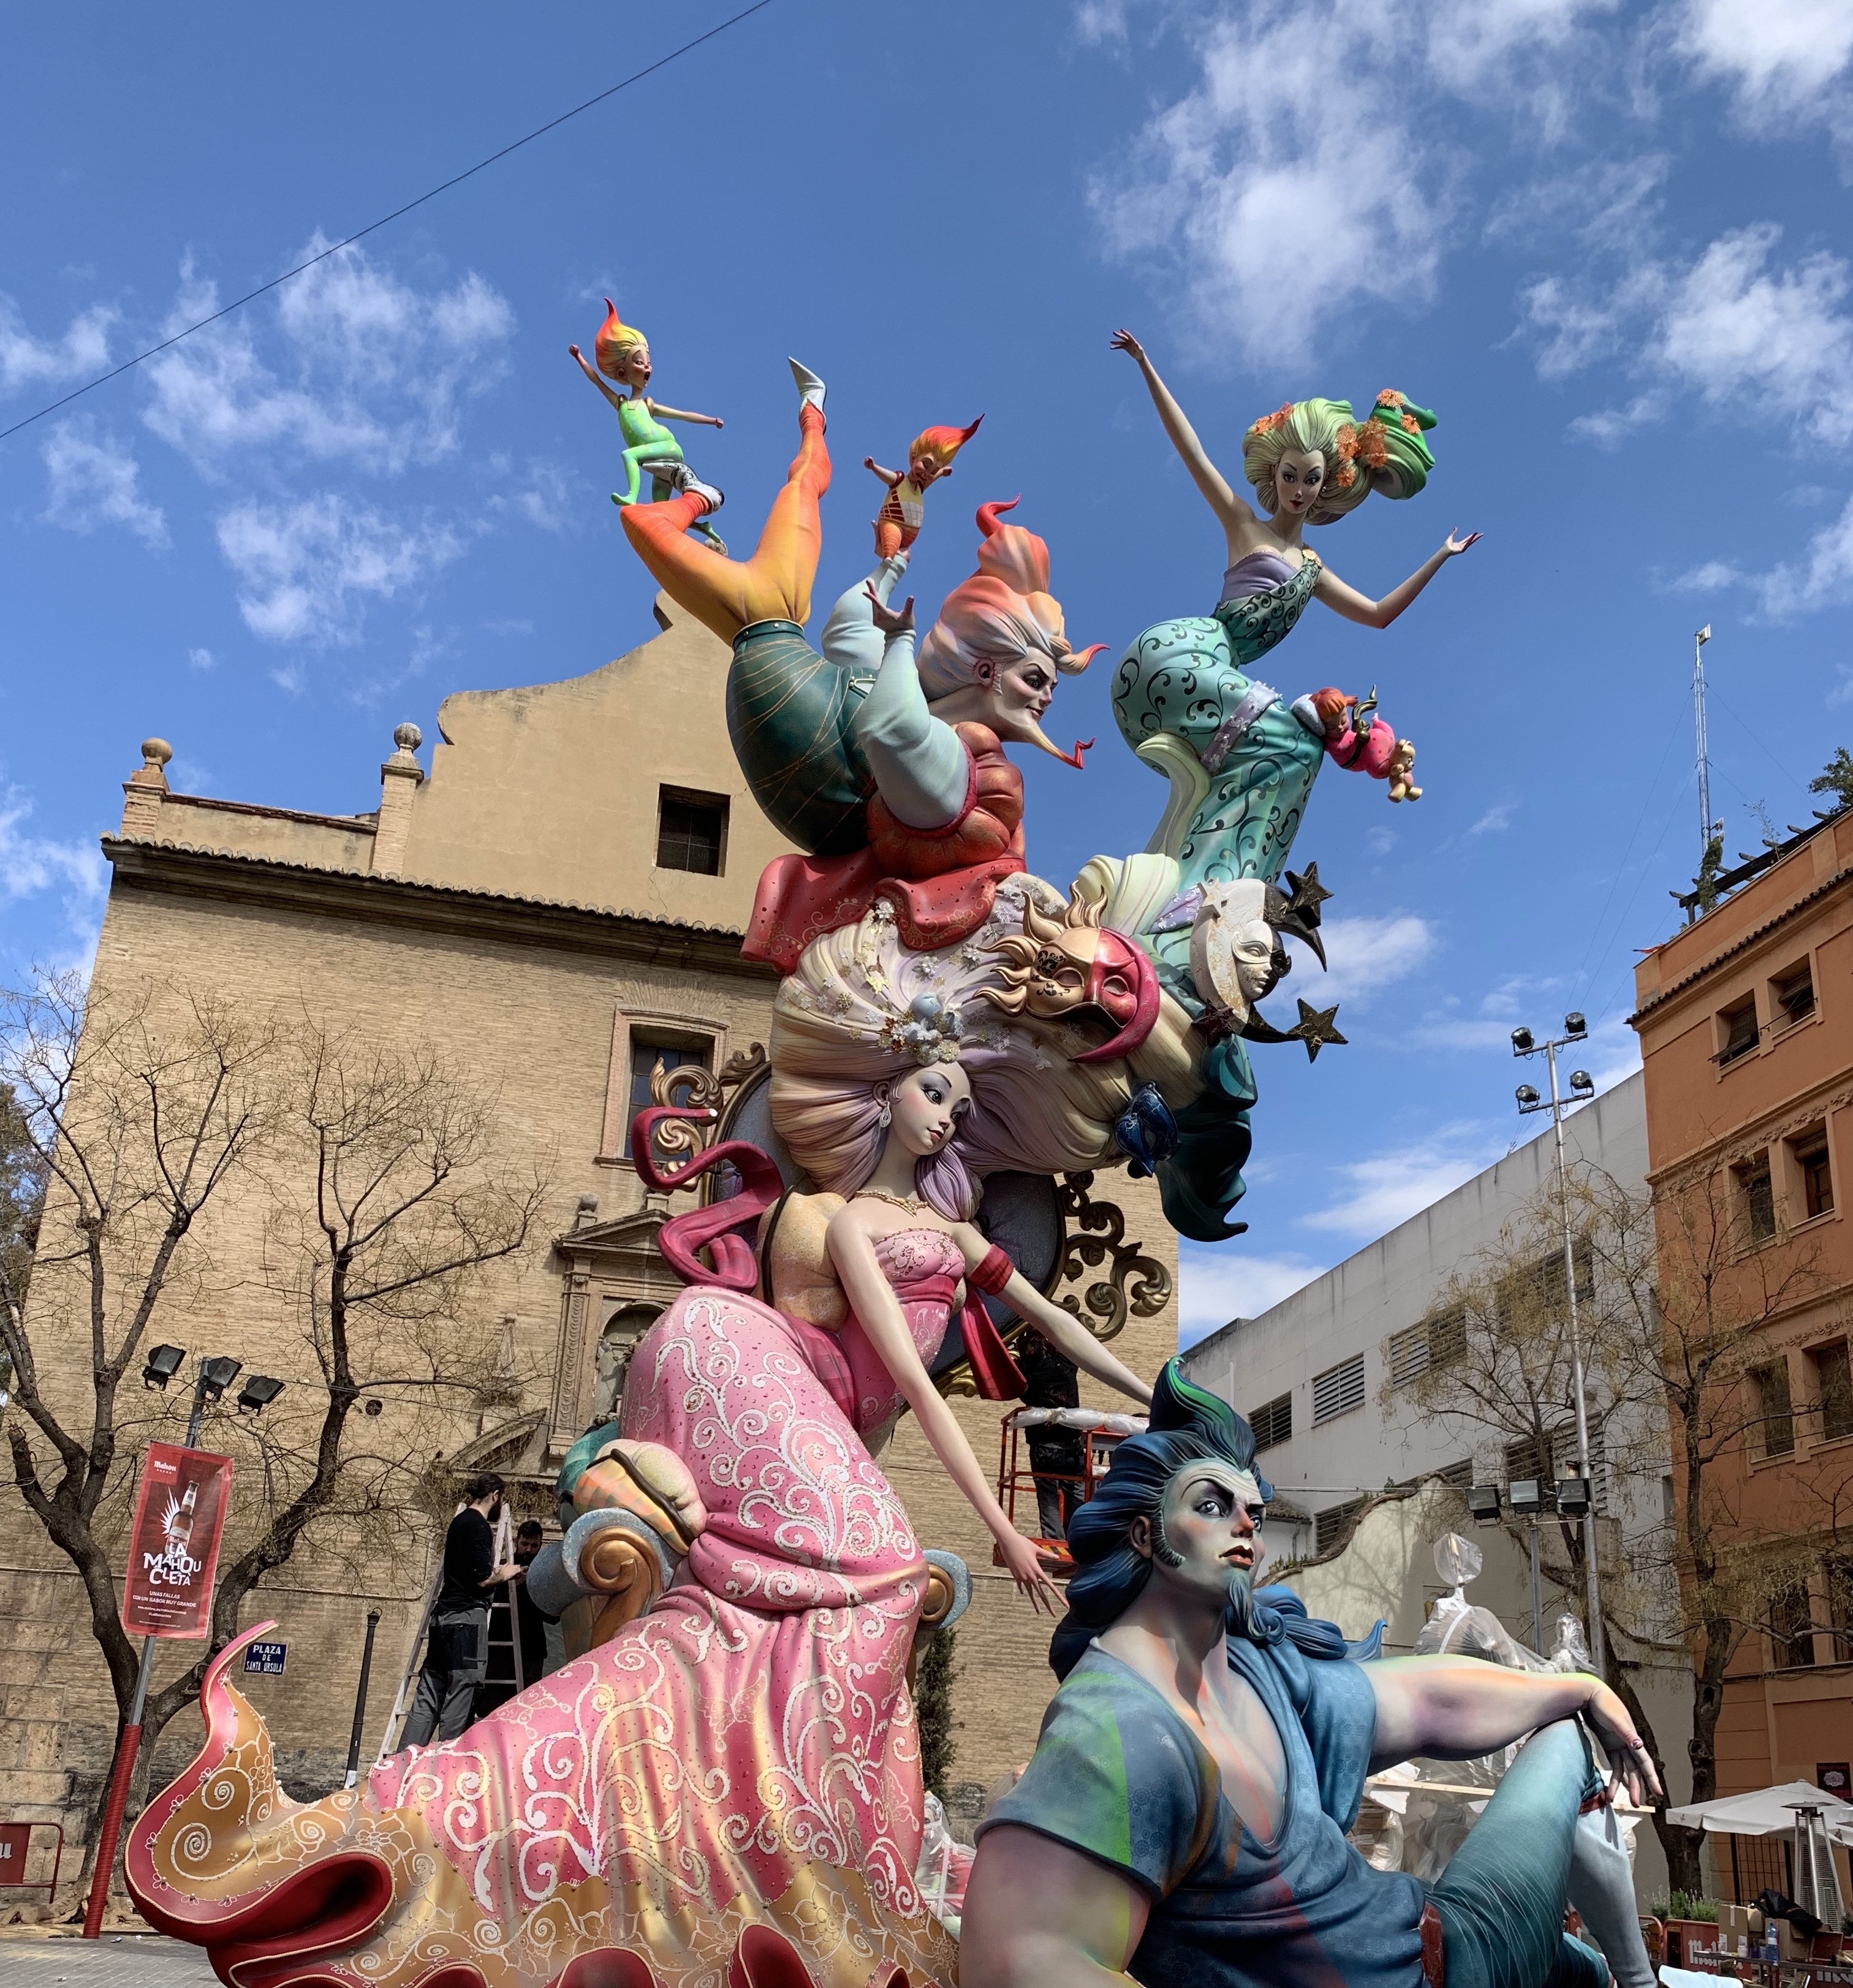 vejkryds filter pedal Las Fallas 2020: The most important festivities in Valencia